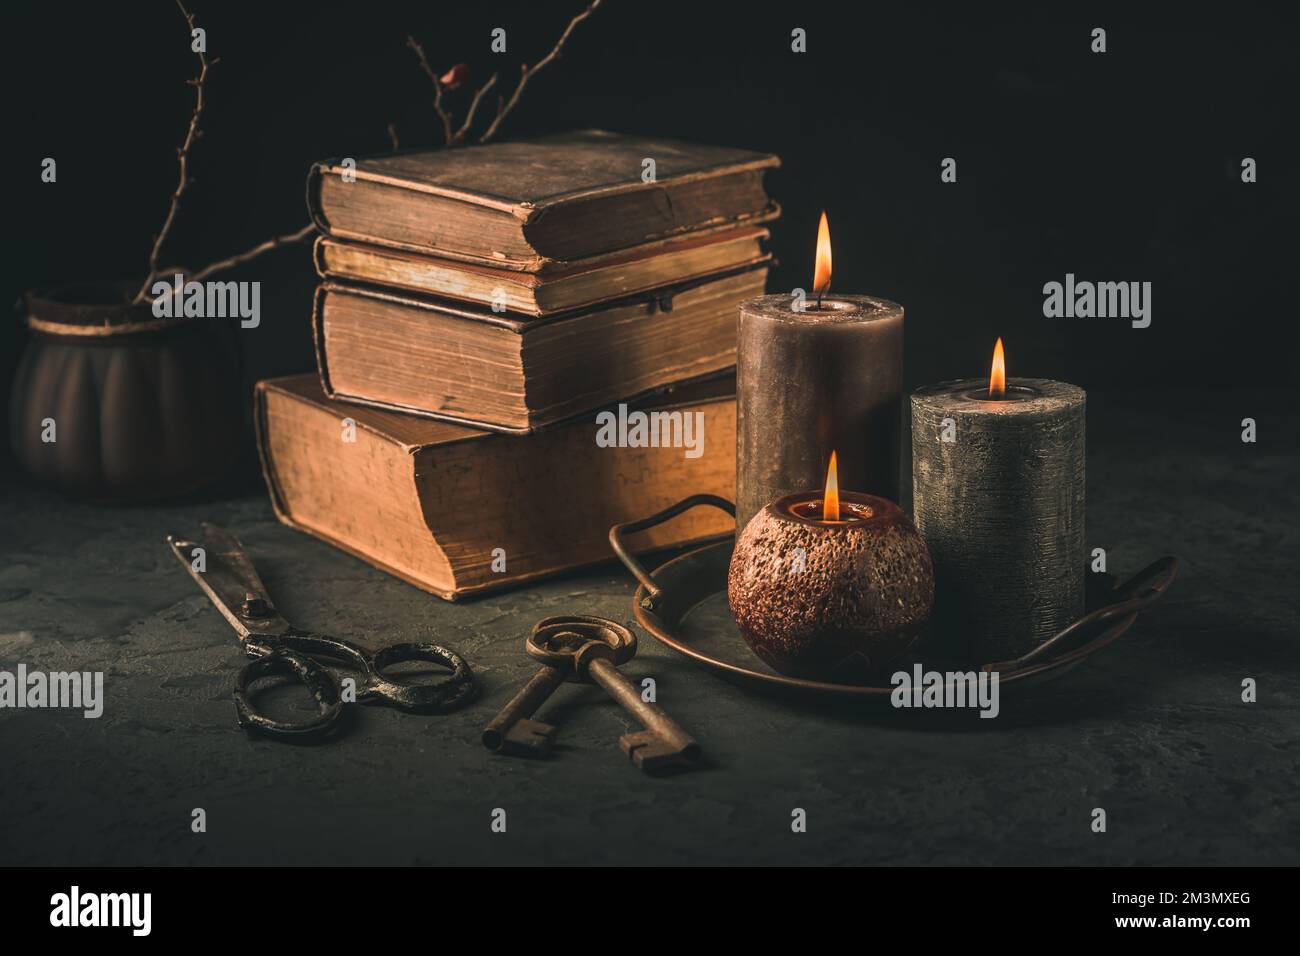 Pile of old antique books with candle and old rusty keys in vintage style on black background Stock Photo